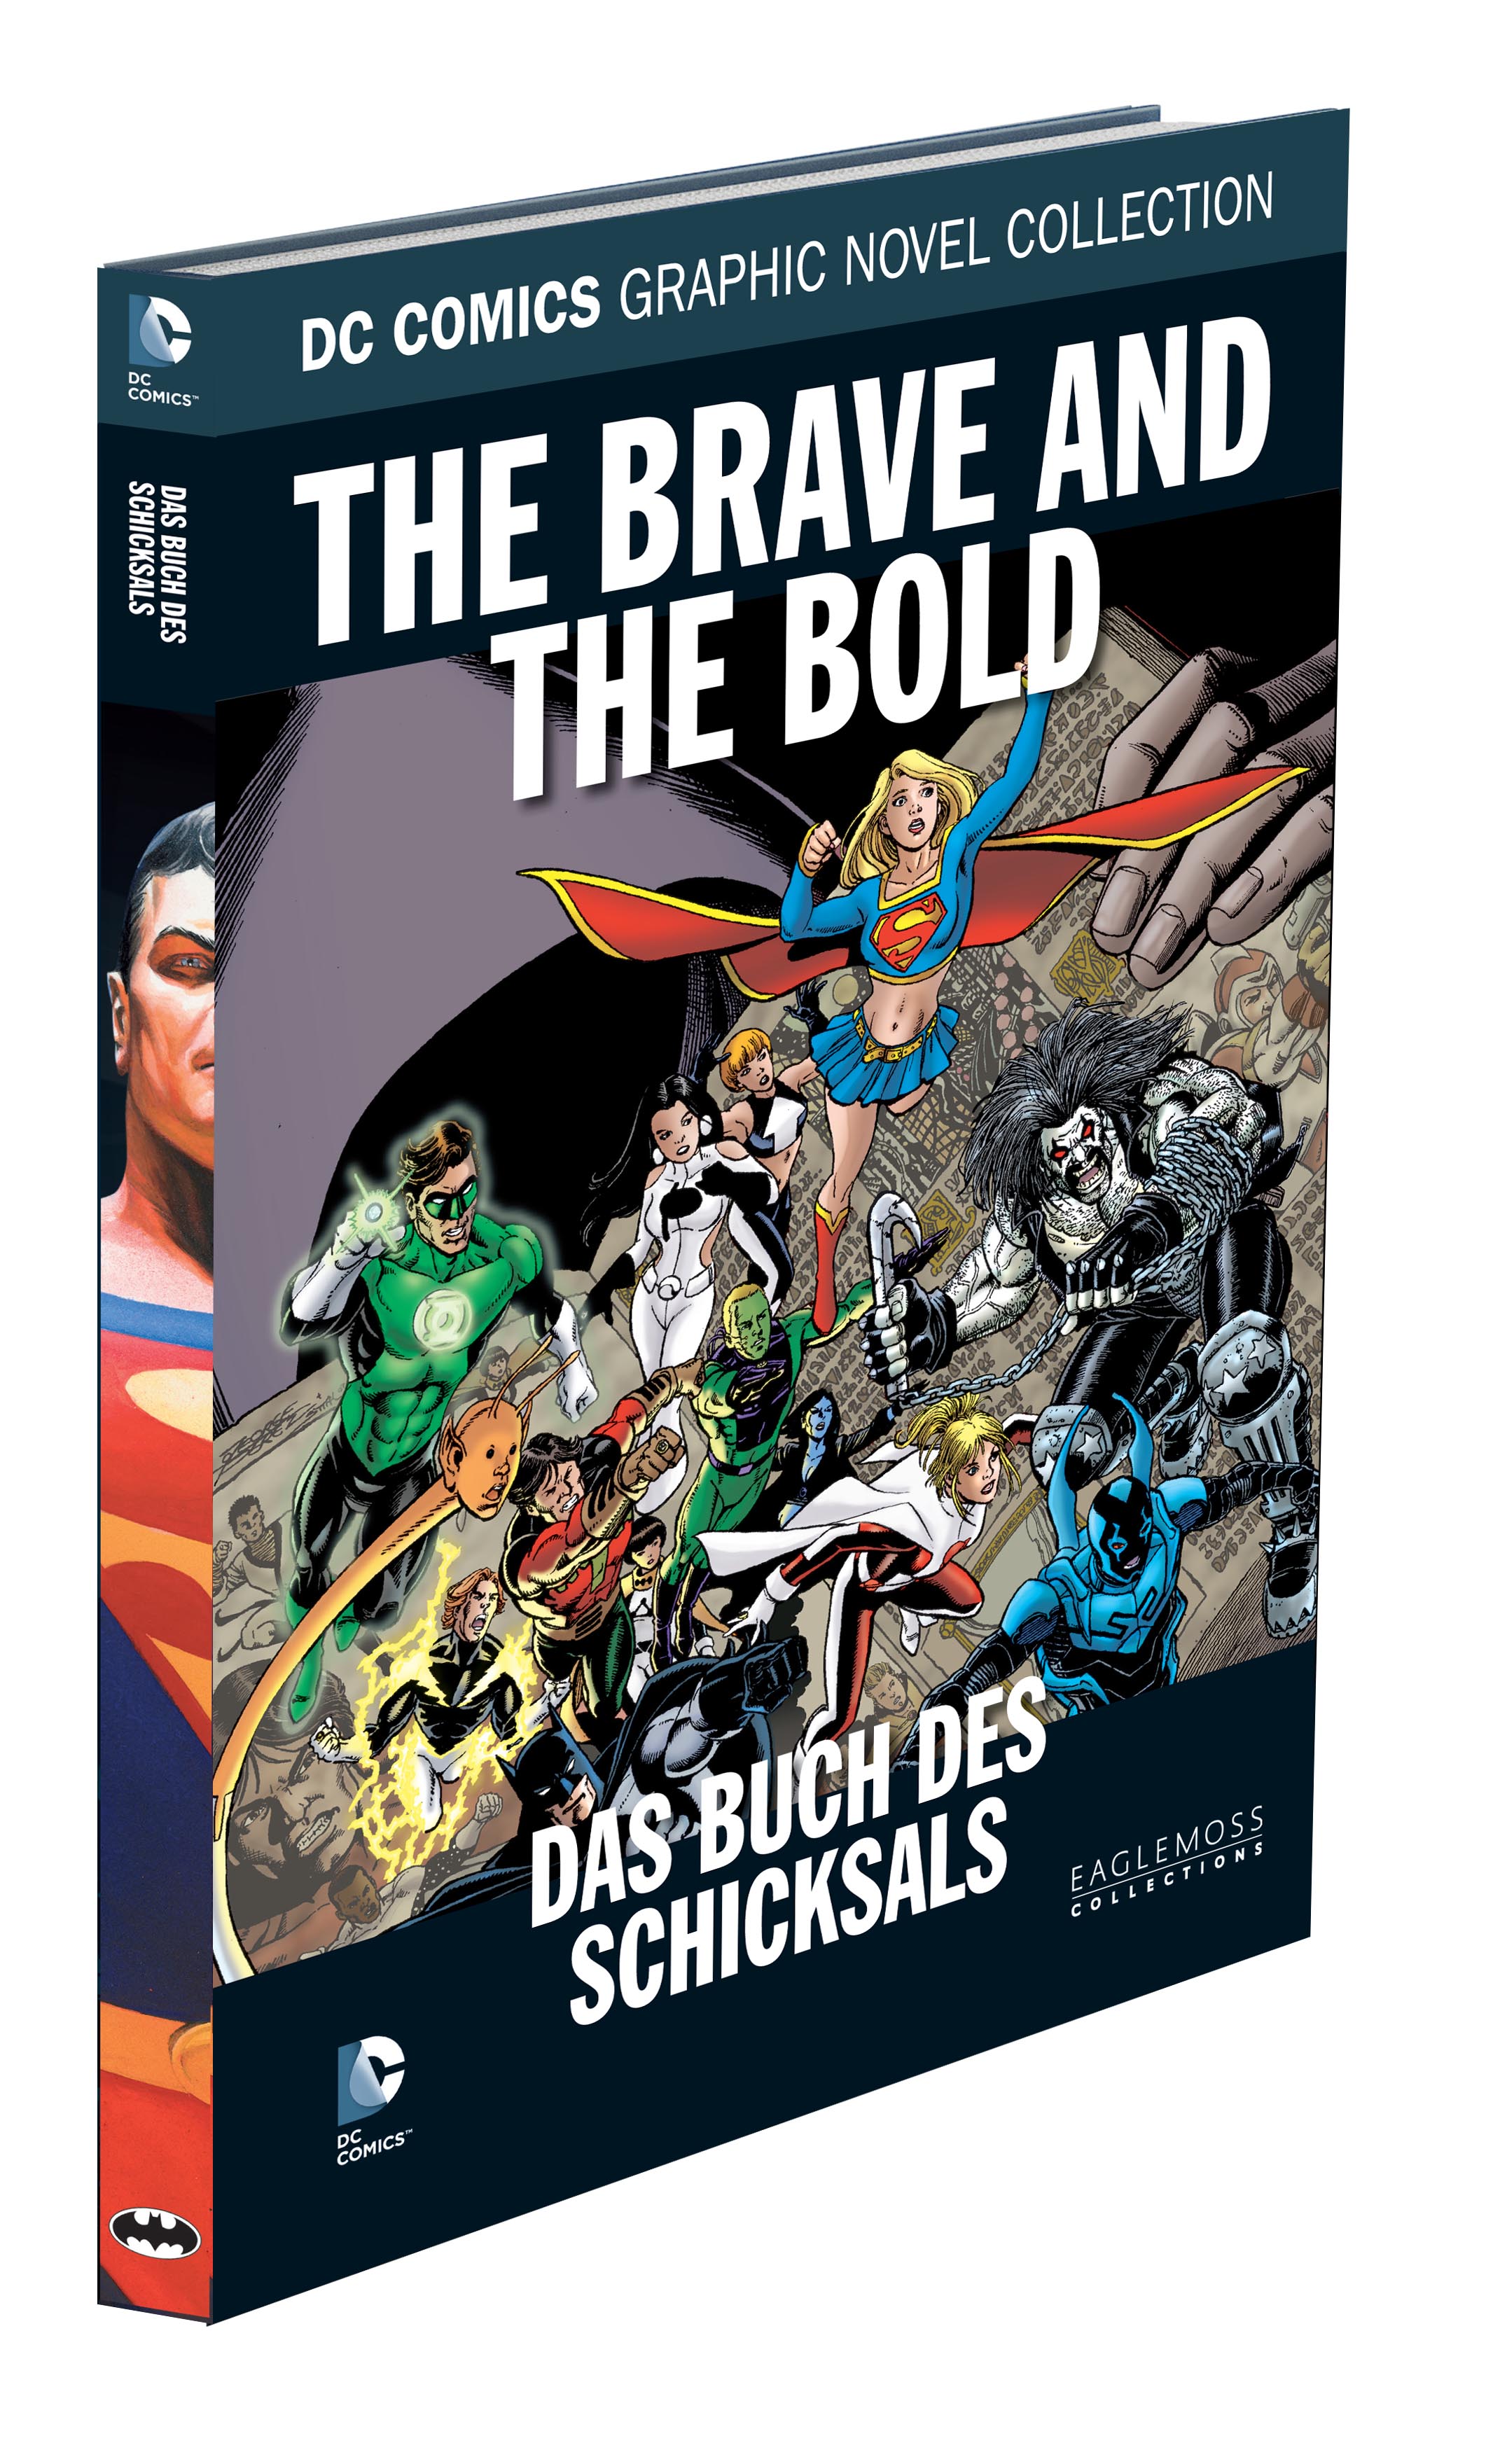 DC Comics Graphic Novel Collection The Brave and the Bold - Das Buch des Schicksals